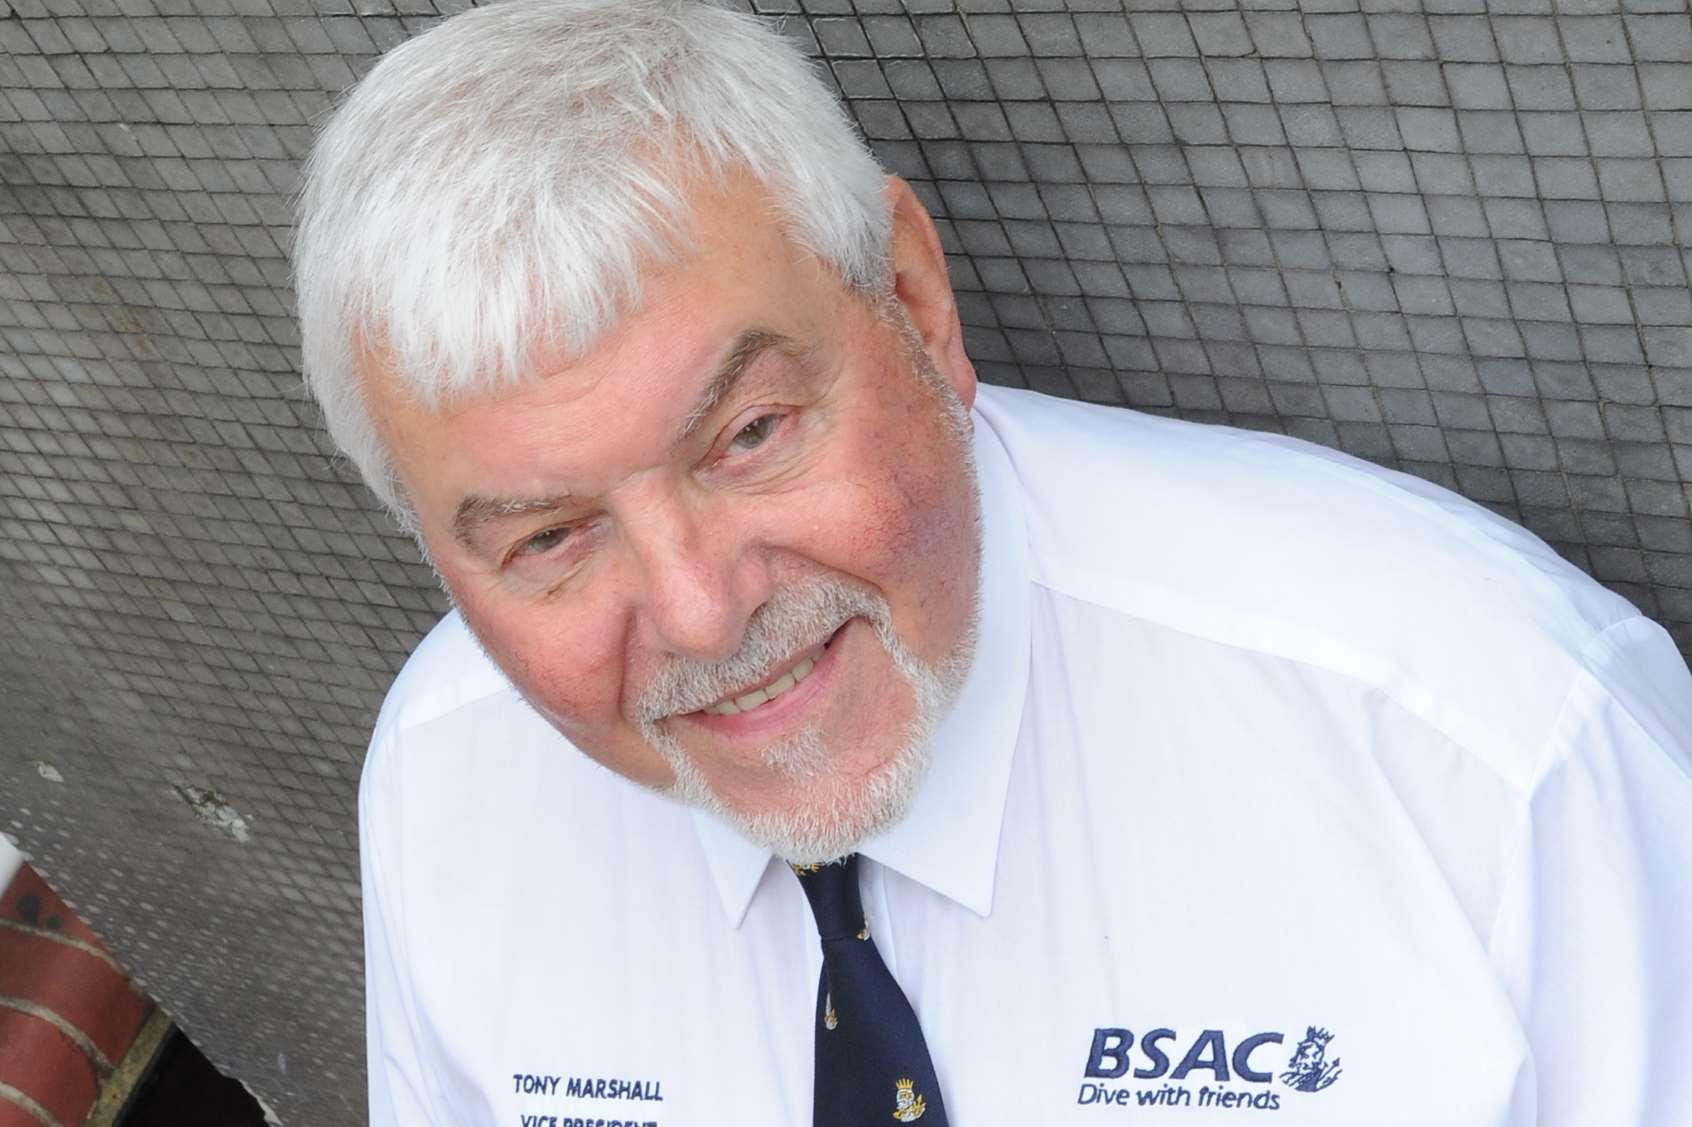 Tony Marshall, from Halsted is BSAC’s vice president